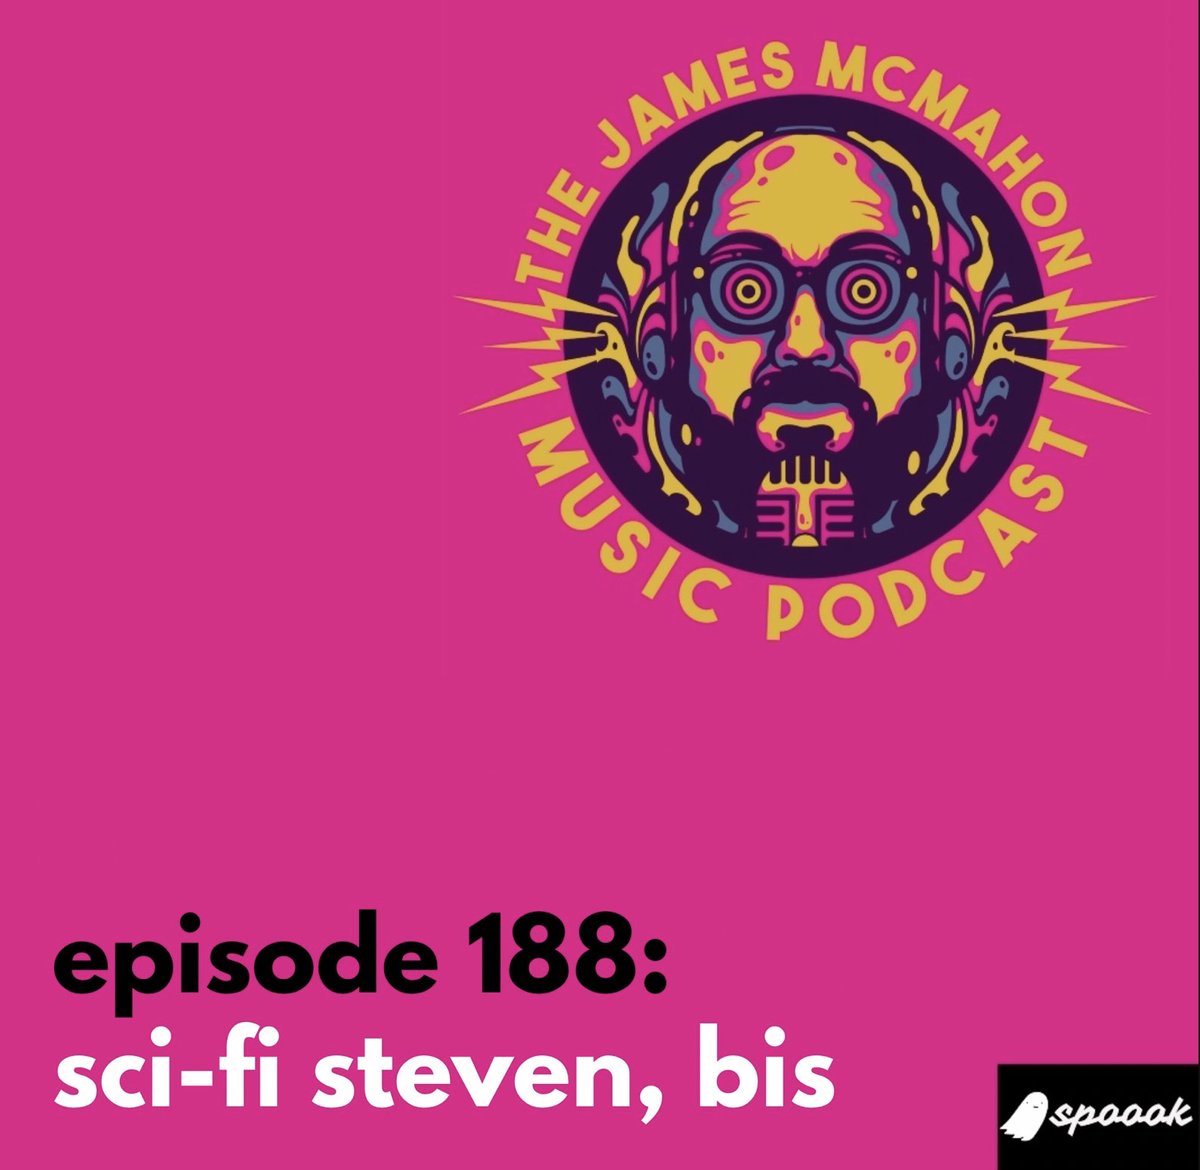 Their long-awaited big chat eventually happened 😝 Check out this rather excellent interview with @scifisteven and @jamesjammcmahon 🙌 open.spotify.com/episode/4LKTiy…